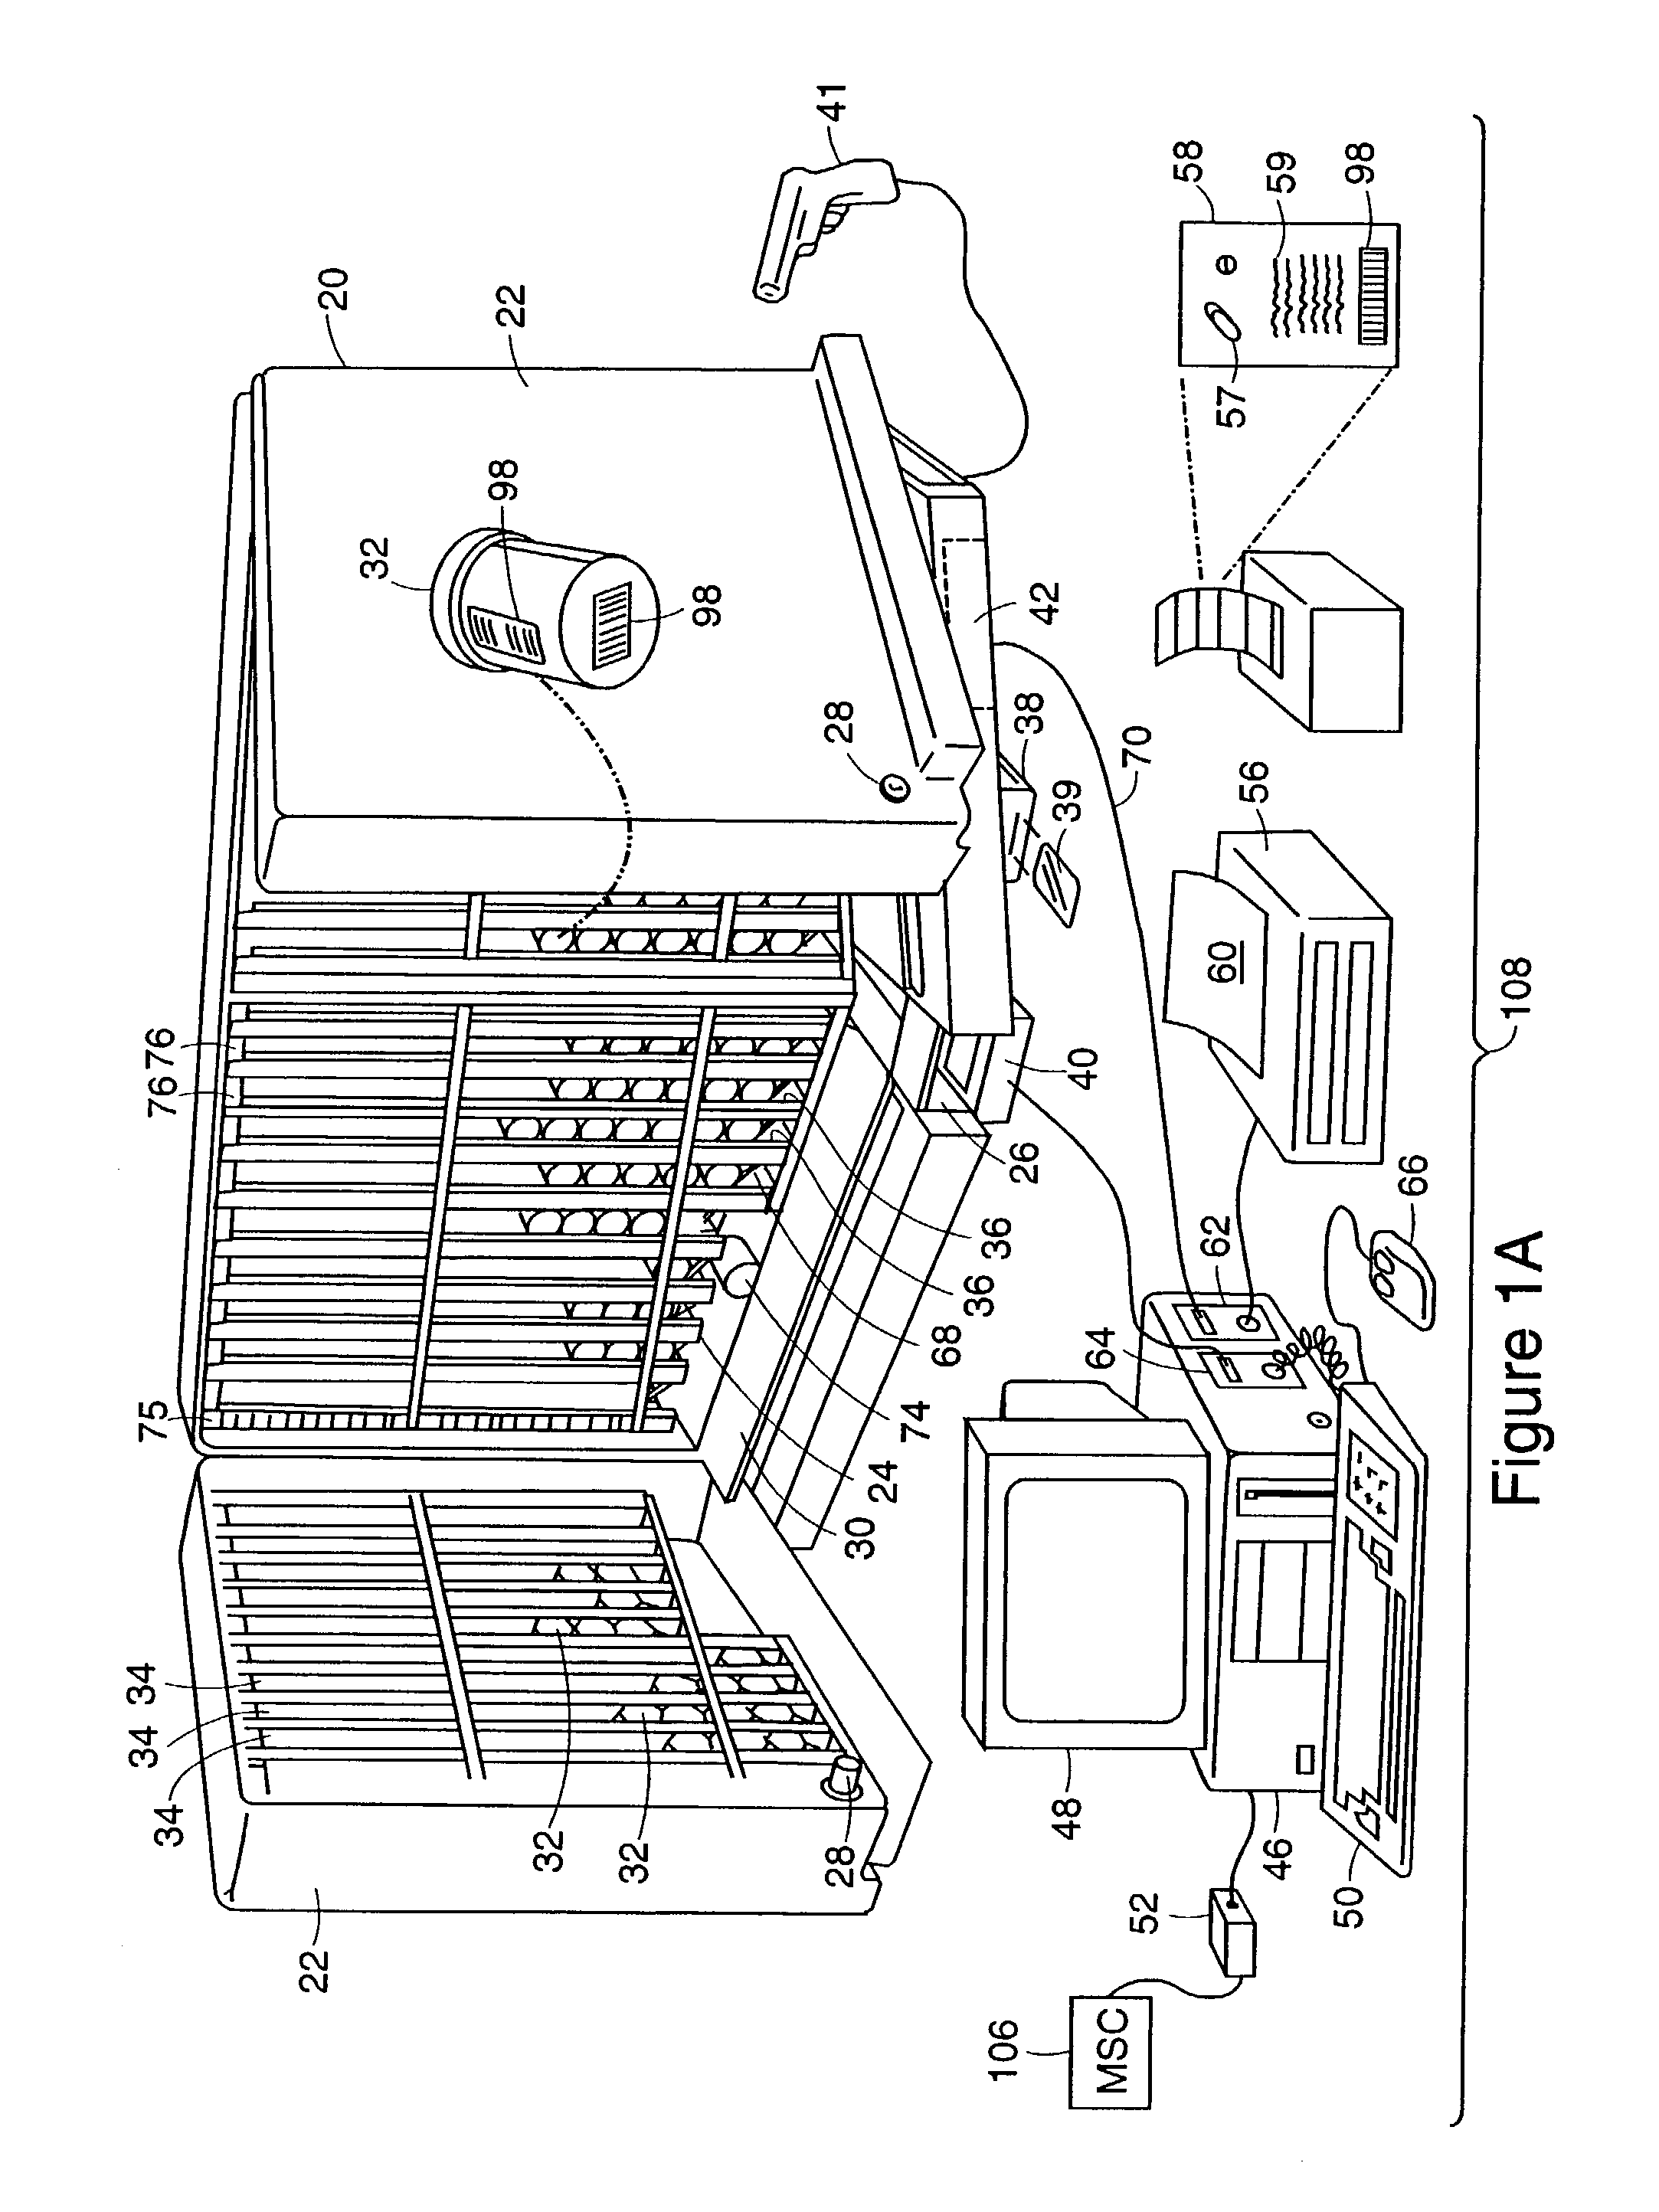 Systems for dispensing medical products